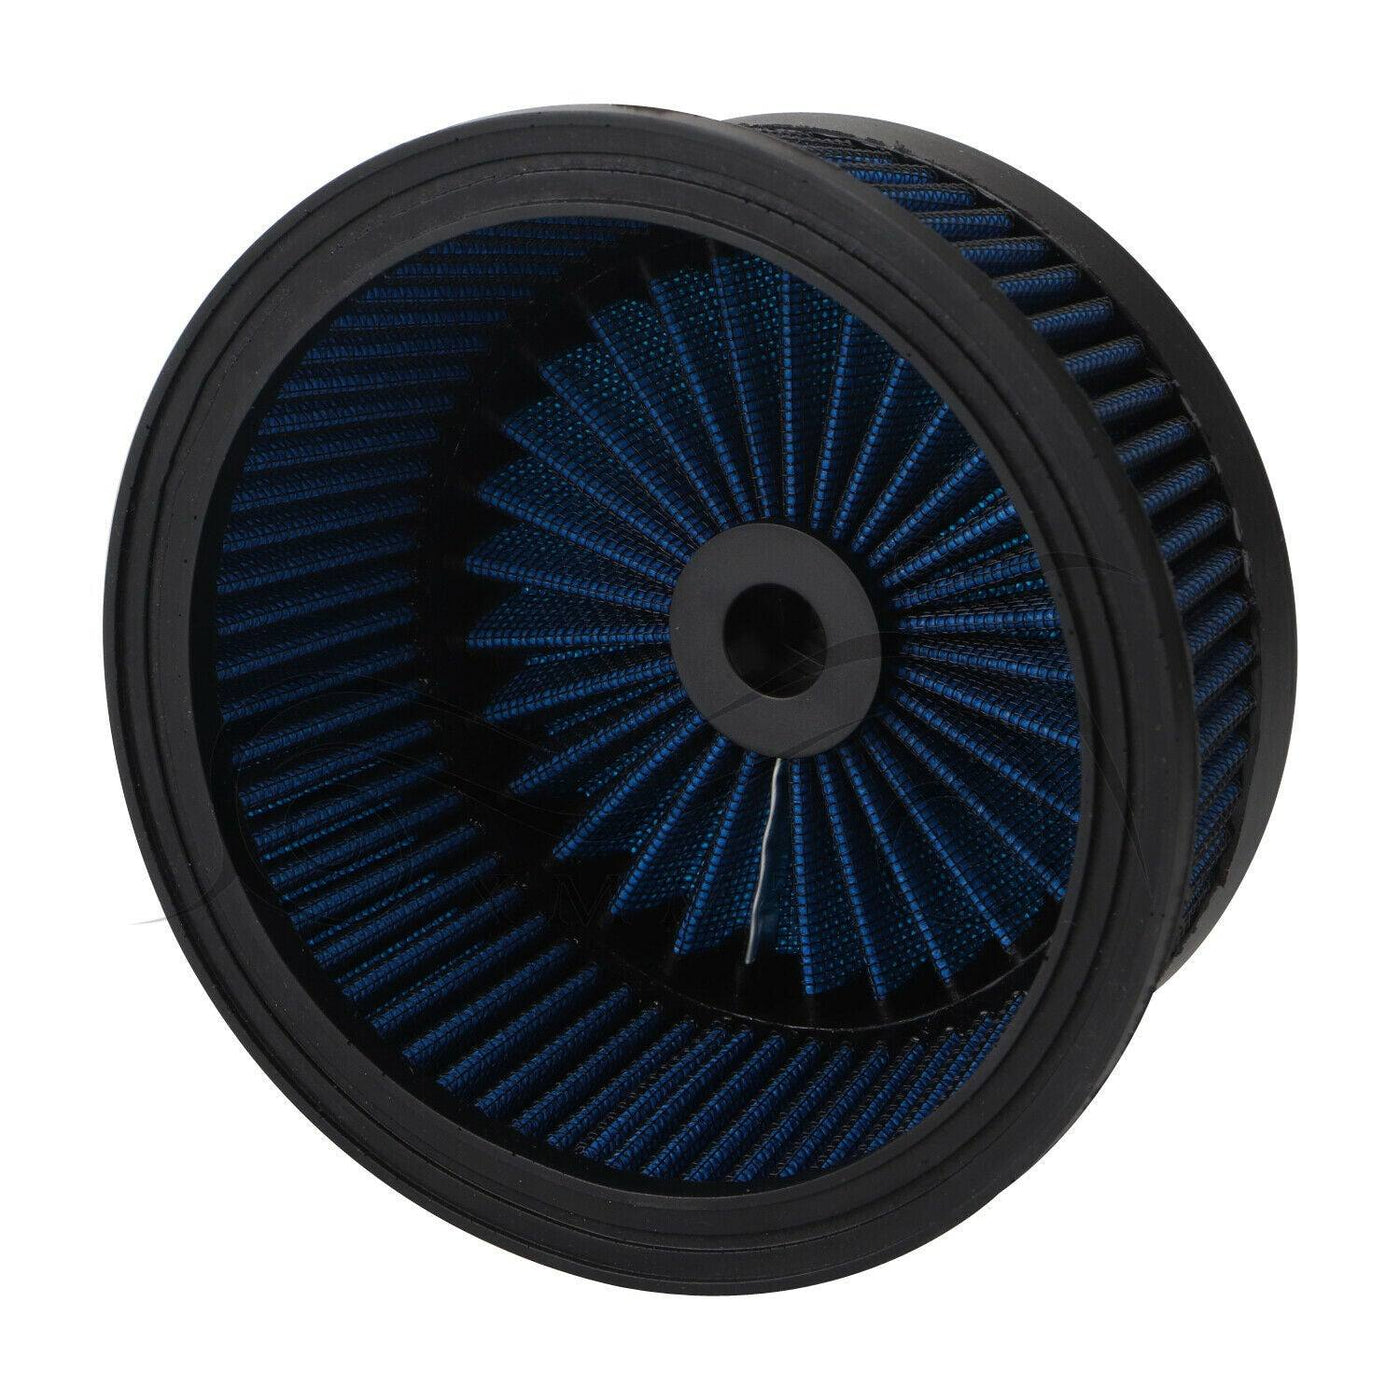 US Air Filter Cleaner Intake Element For Harley Touring Road King Electra Glide - Moto Life Products